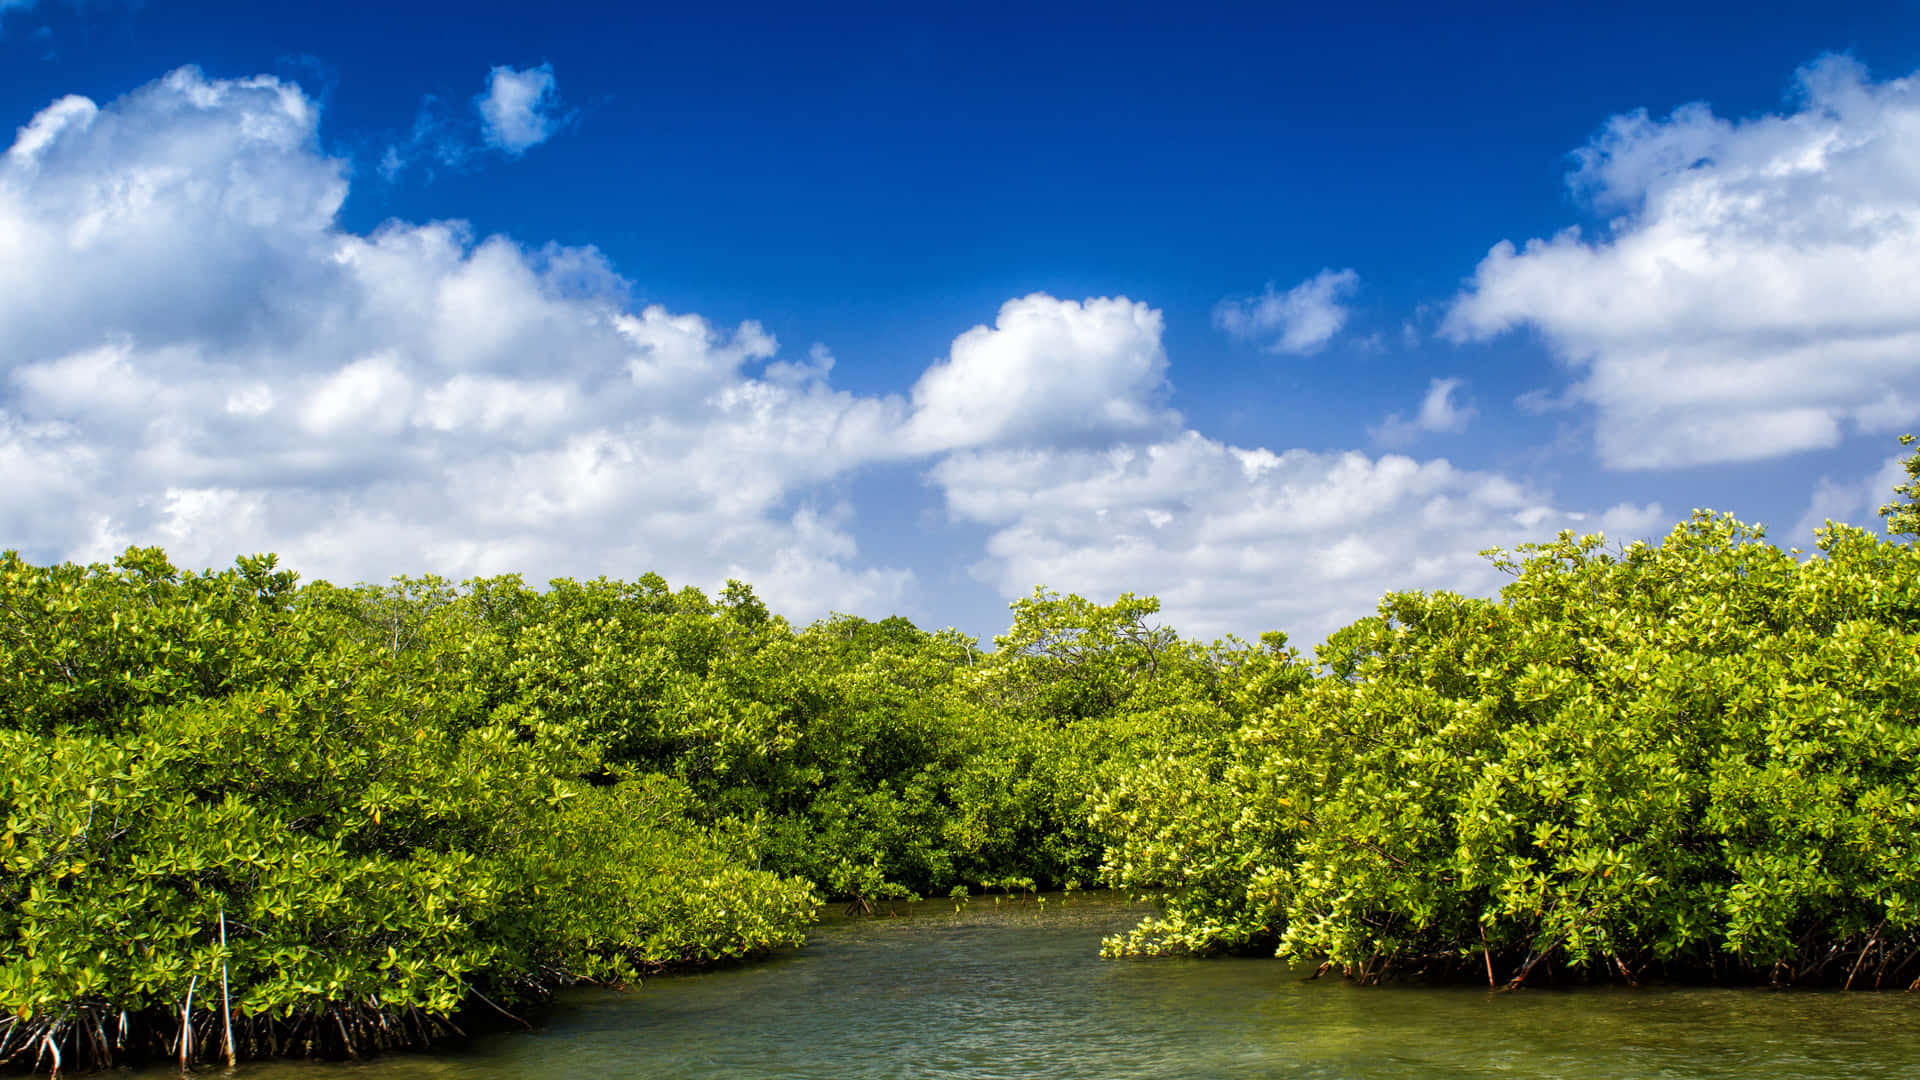 A Mangrove Forest With Trees